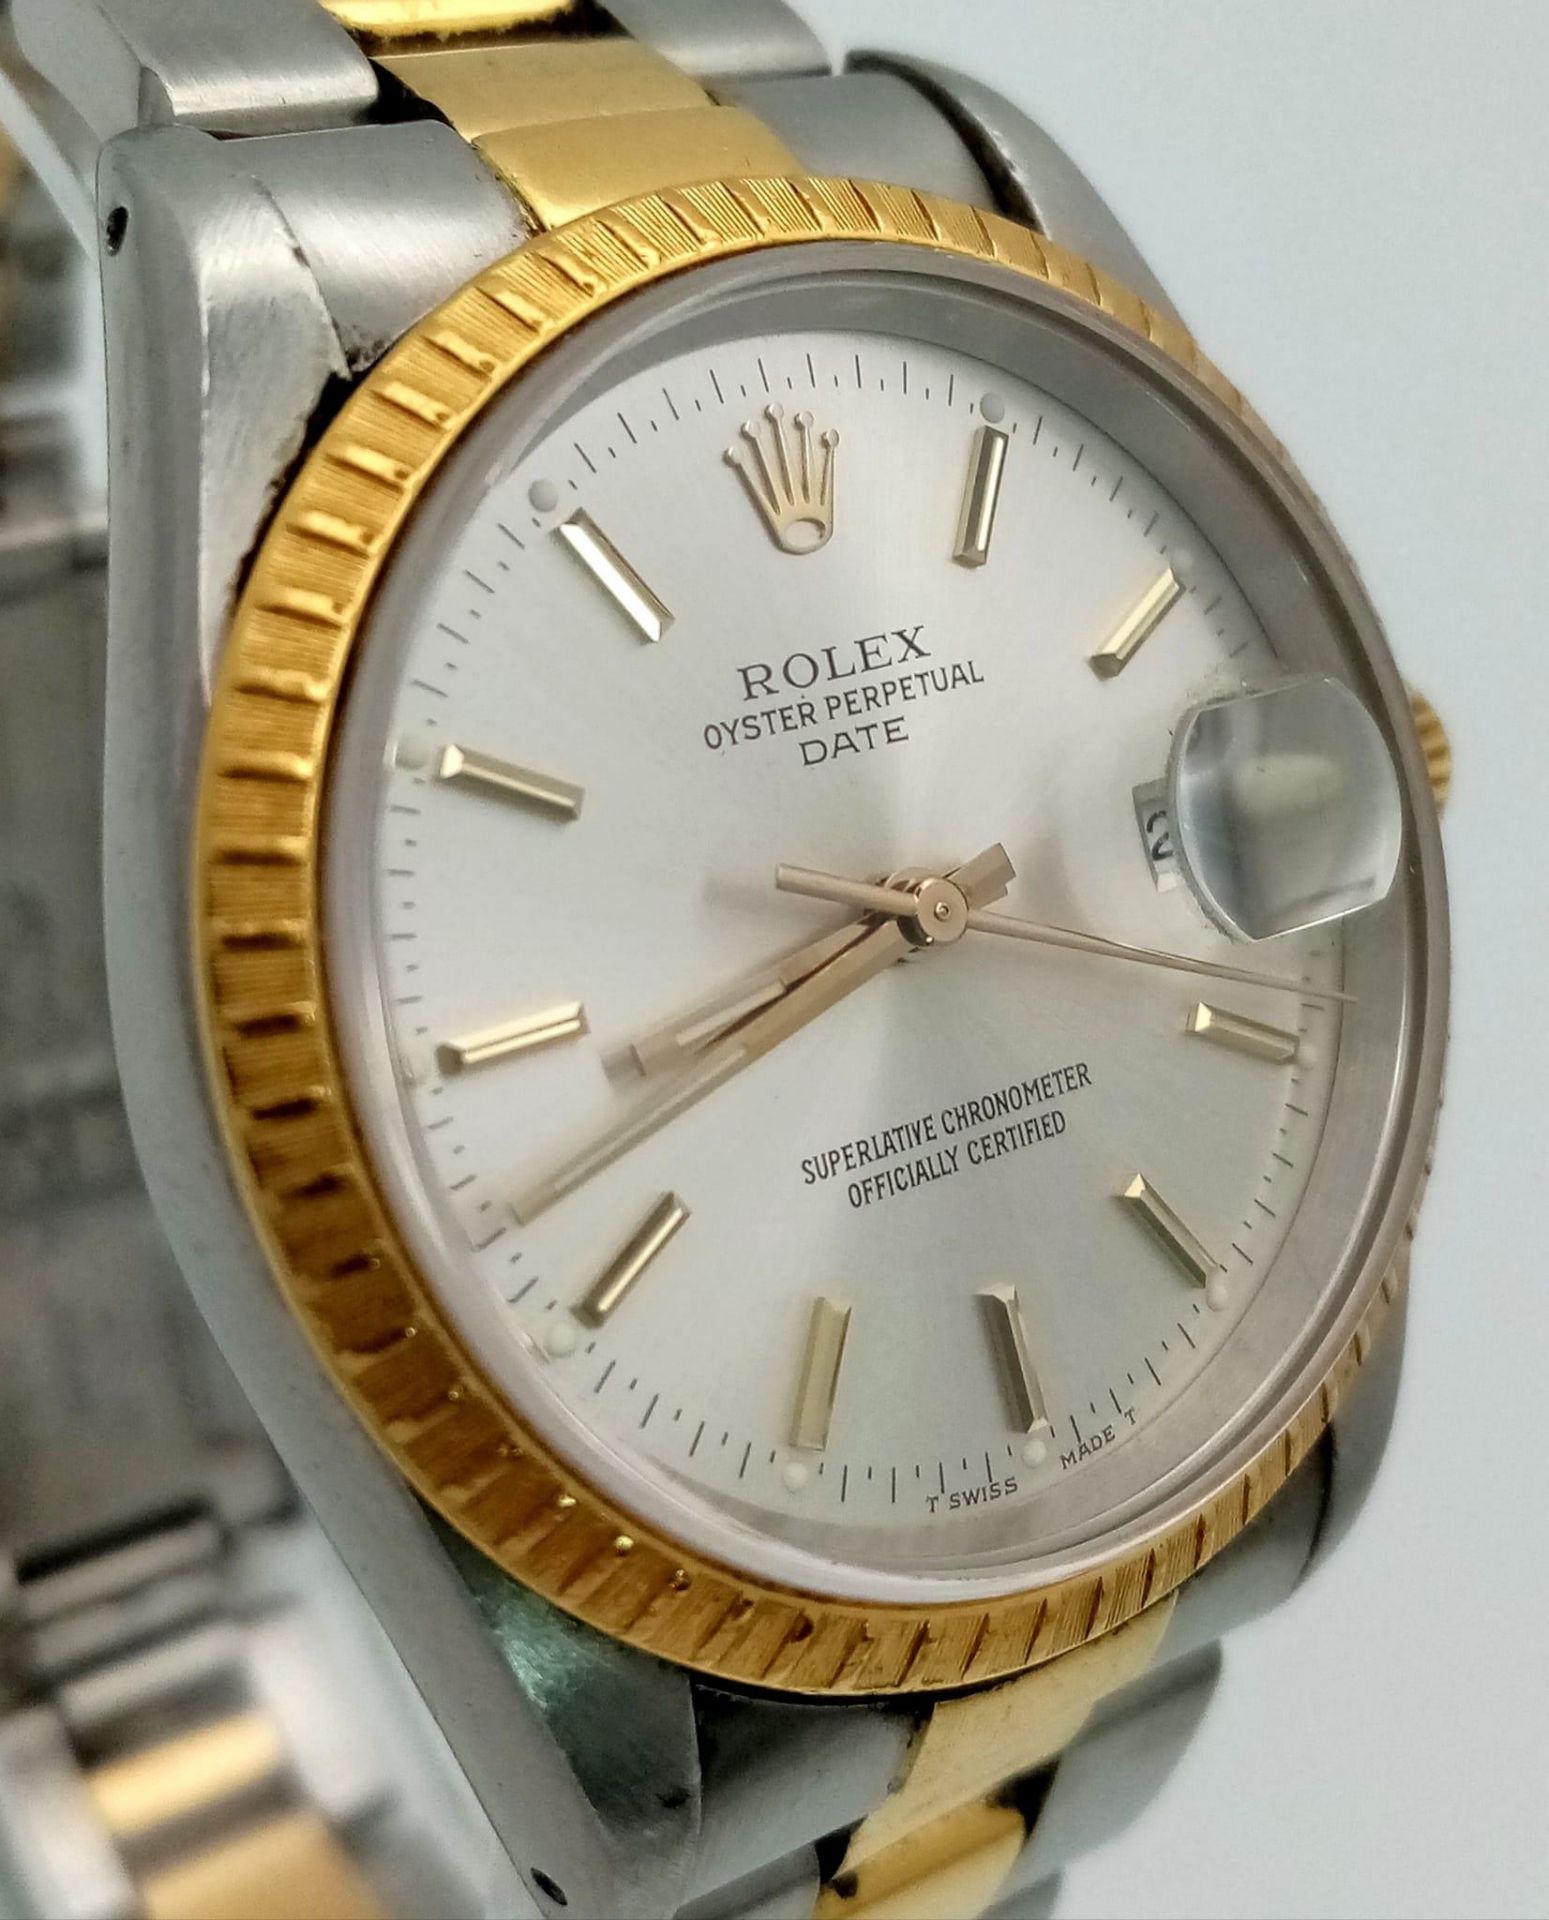 THE CLASSIC ROLEX OYSTER PERPETUAL DATE AUTOMATIC BI-METAL GENTS WATCH WITH TASTEFUL SILVERTONE DIAL - Image 4 of 19